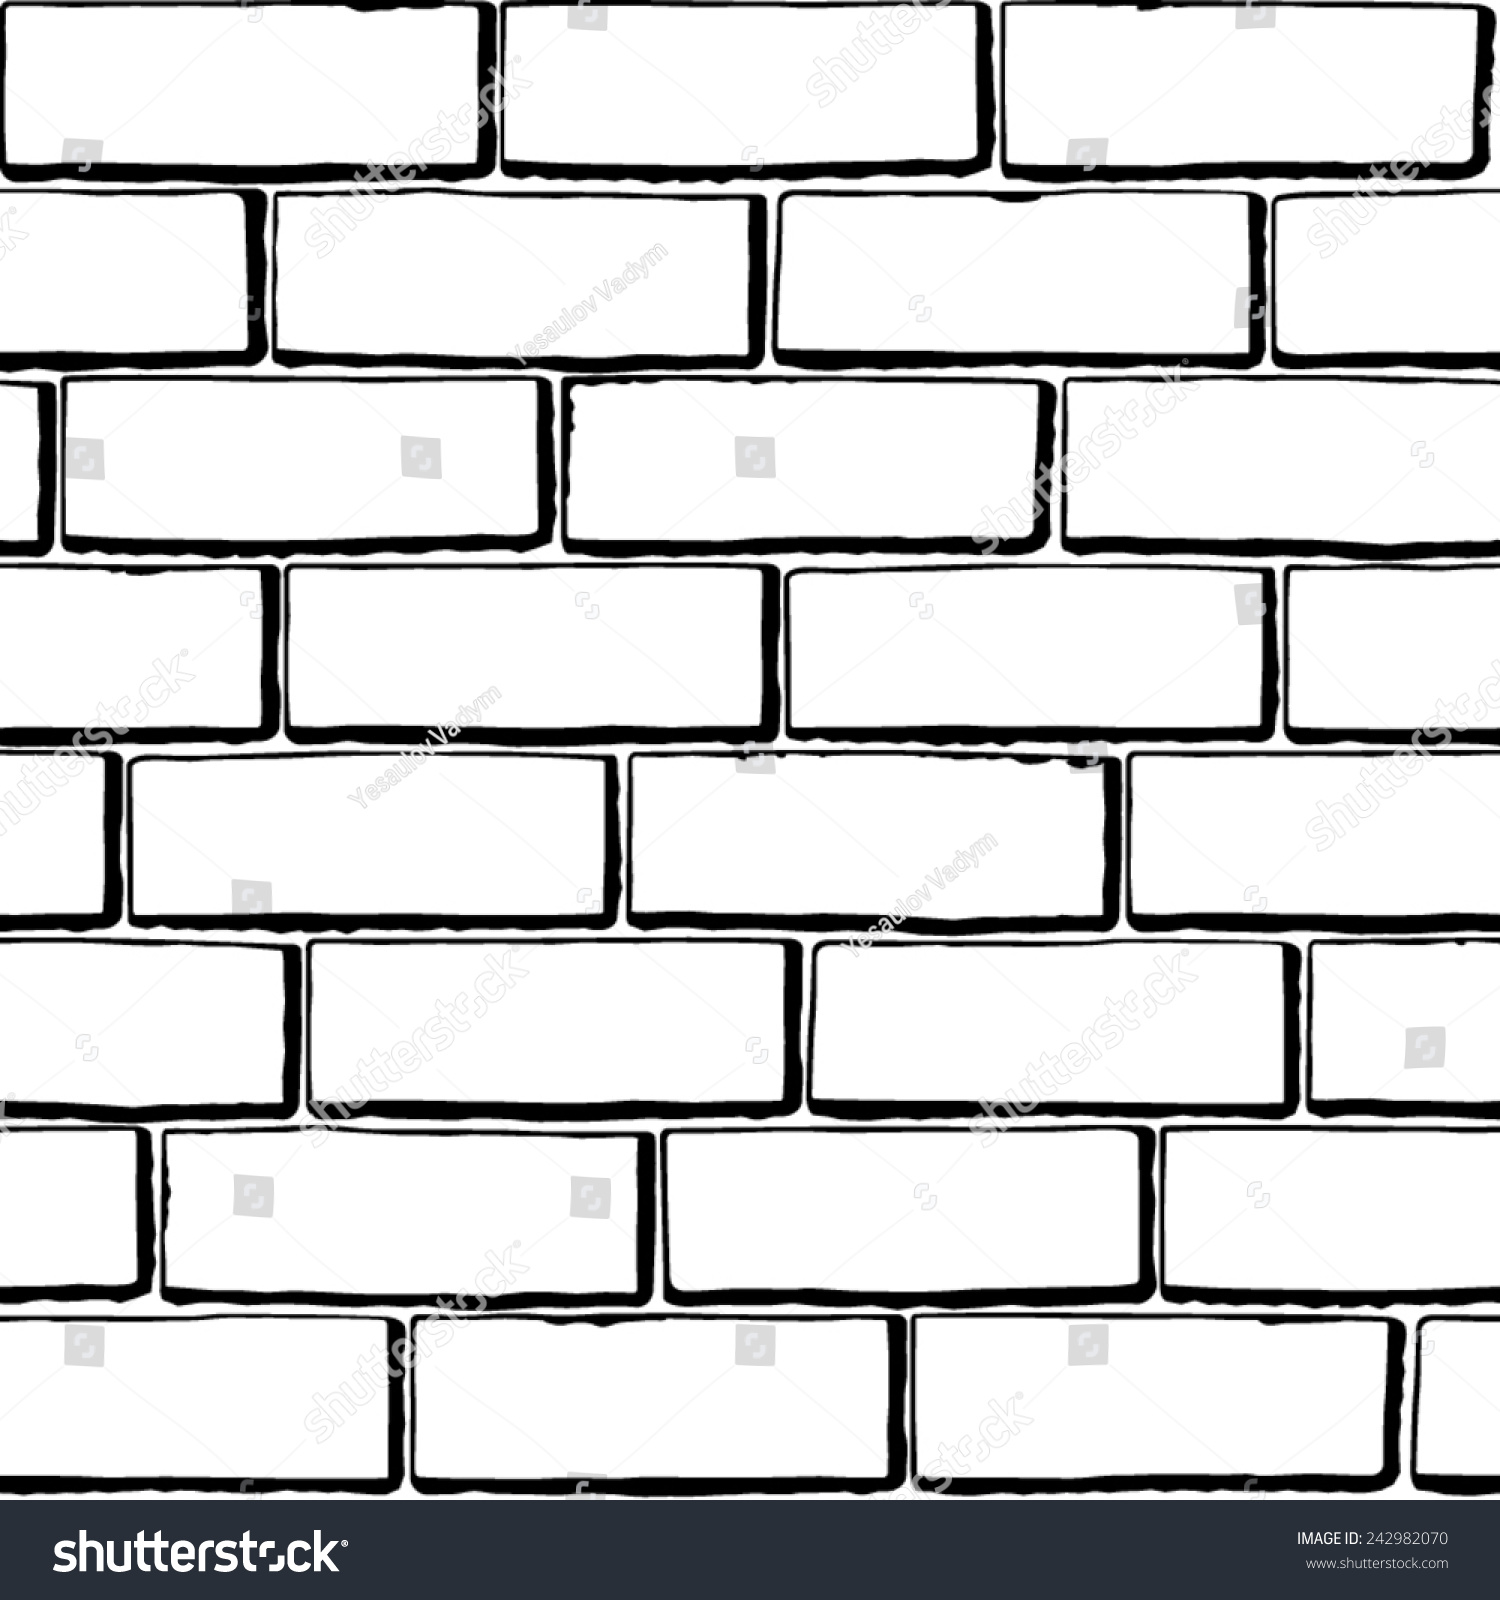 Black And White Brick Wall. Seamless Vector Texture - 242982070